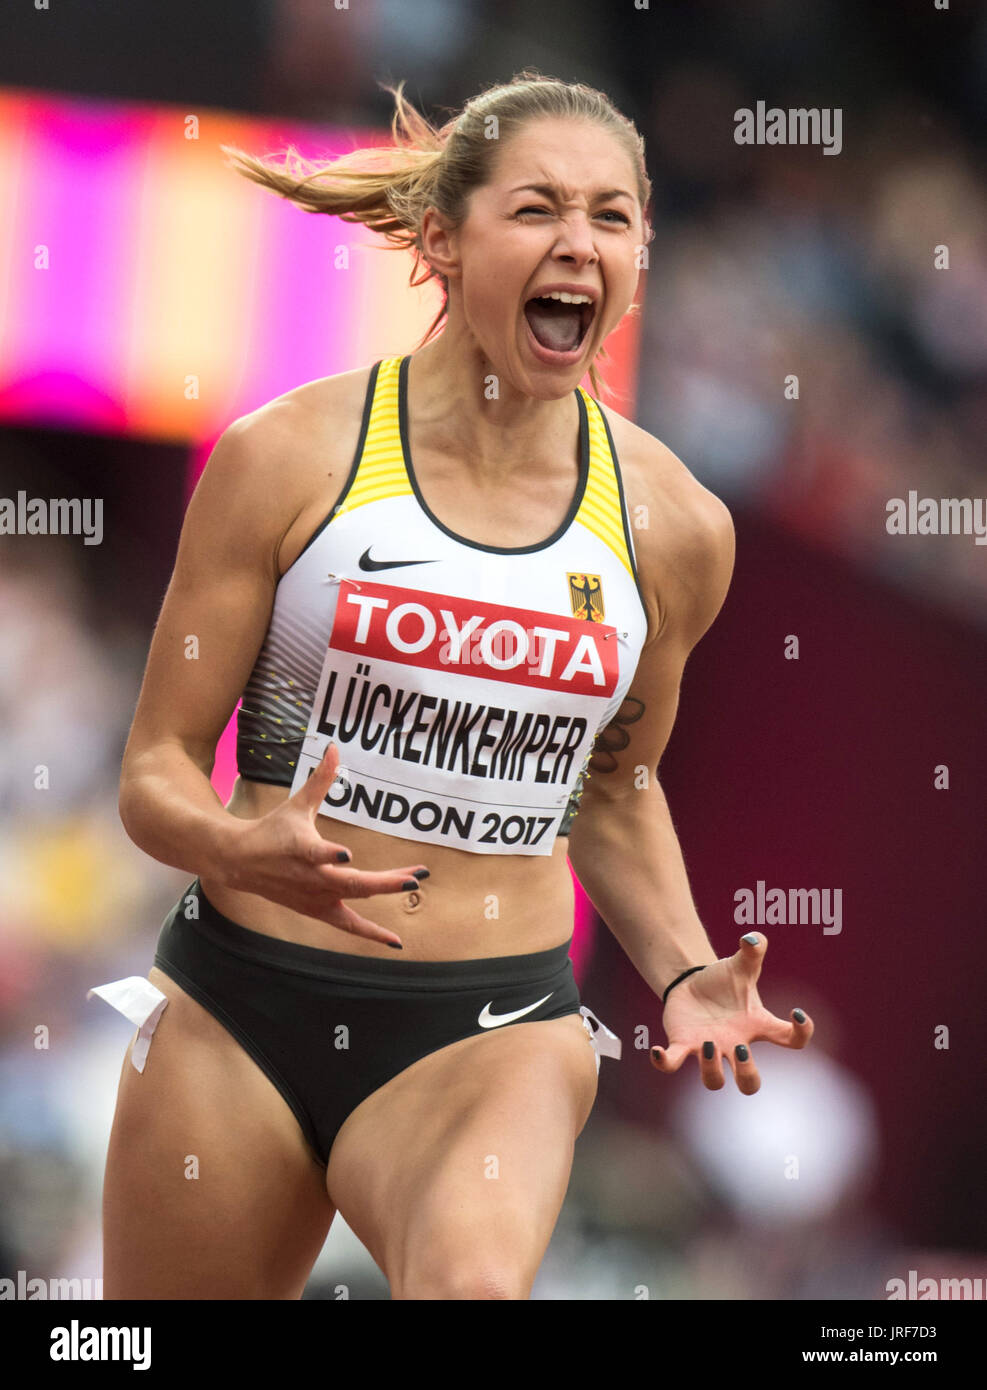 London, Great Britain. 04th Aug, 2017. German sprinter Gina Luckenkemper  celebrates her win at the 100 meter qualifier with her personal record of  10, 95 seconds at the 2017 London World Championships